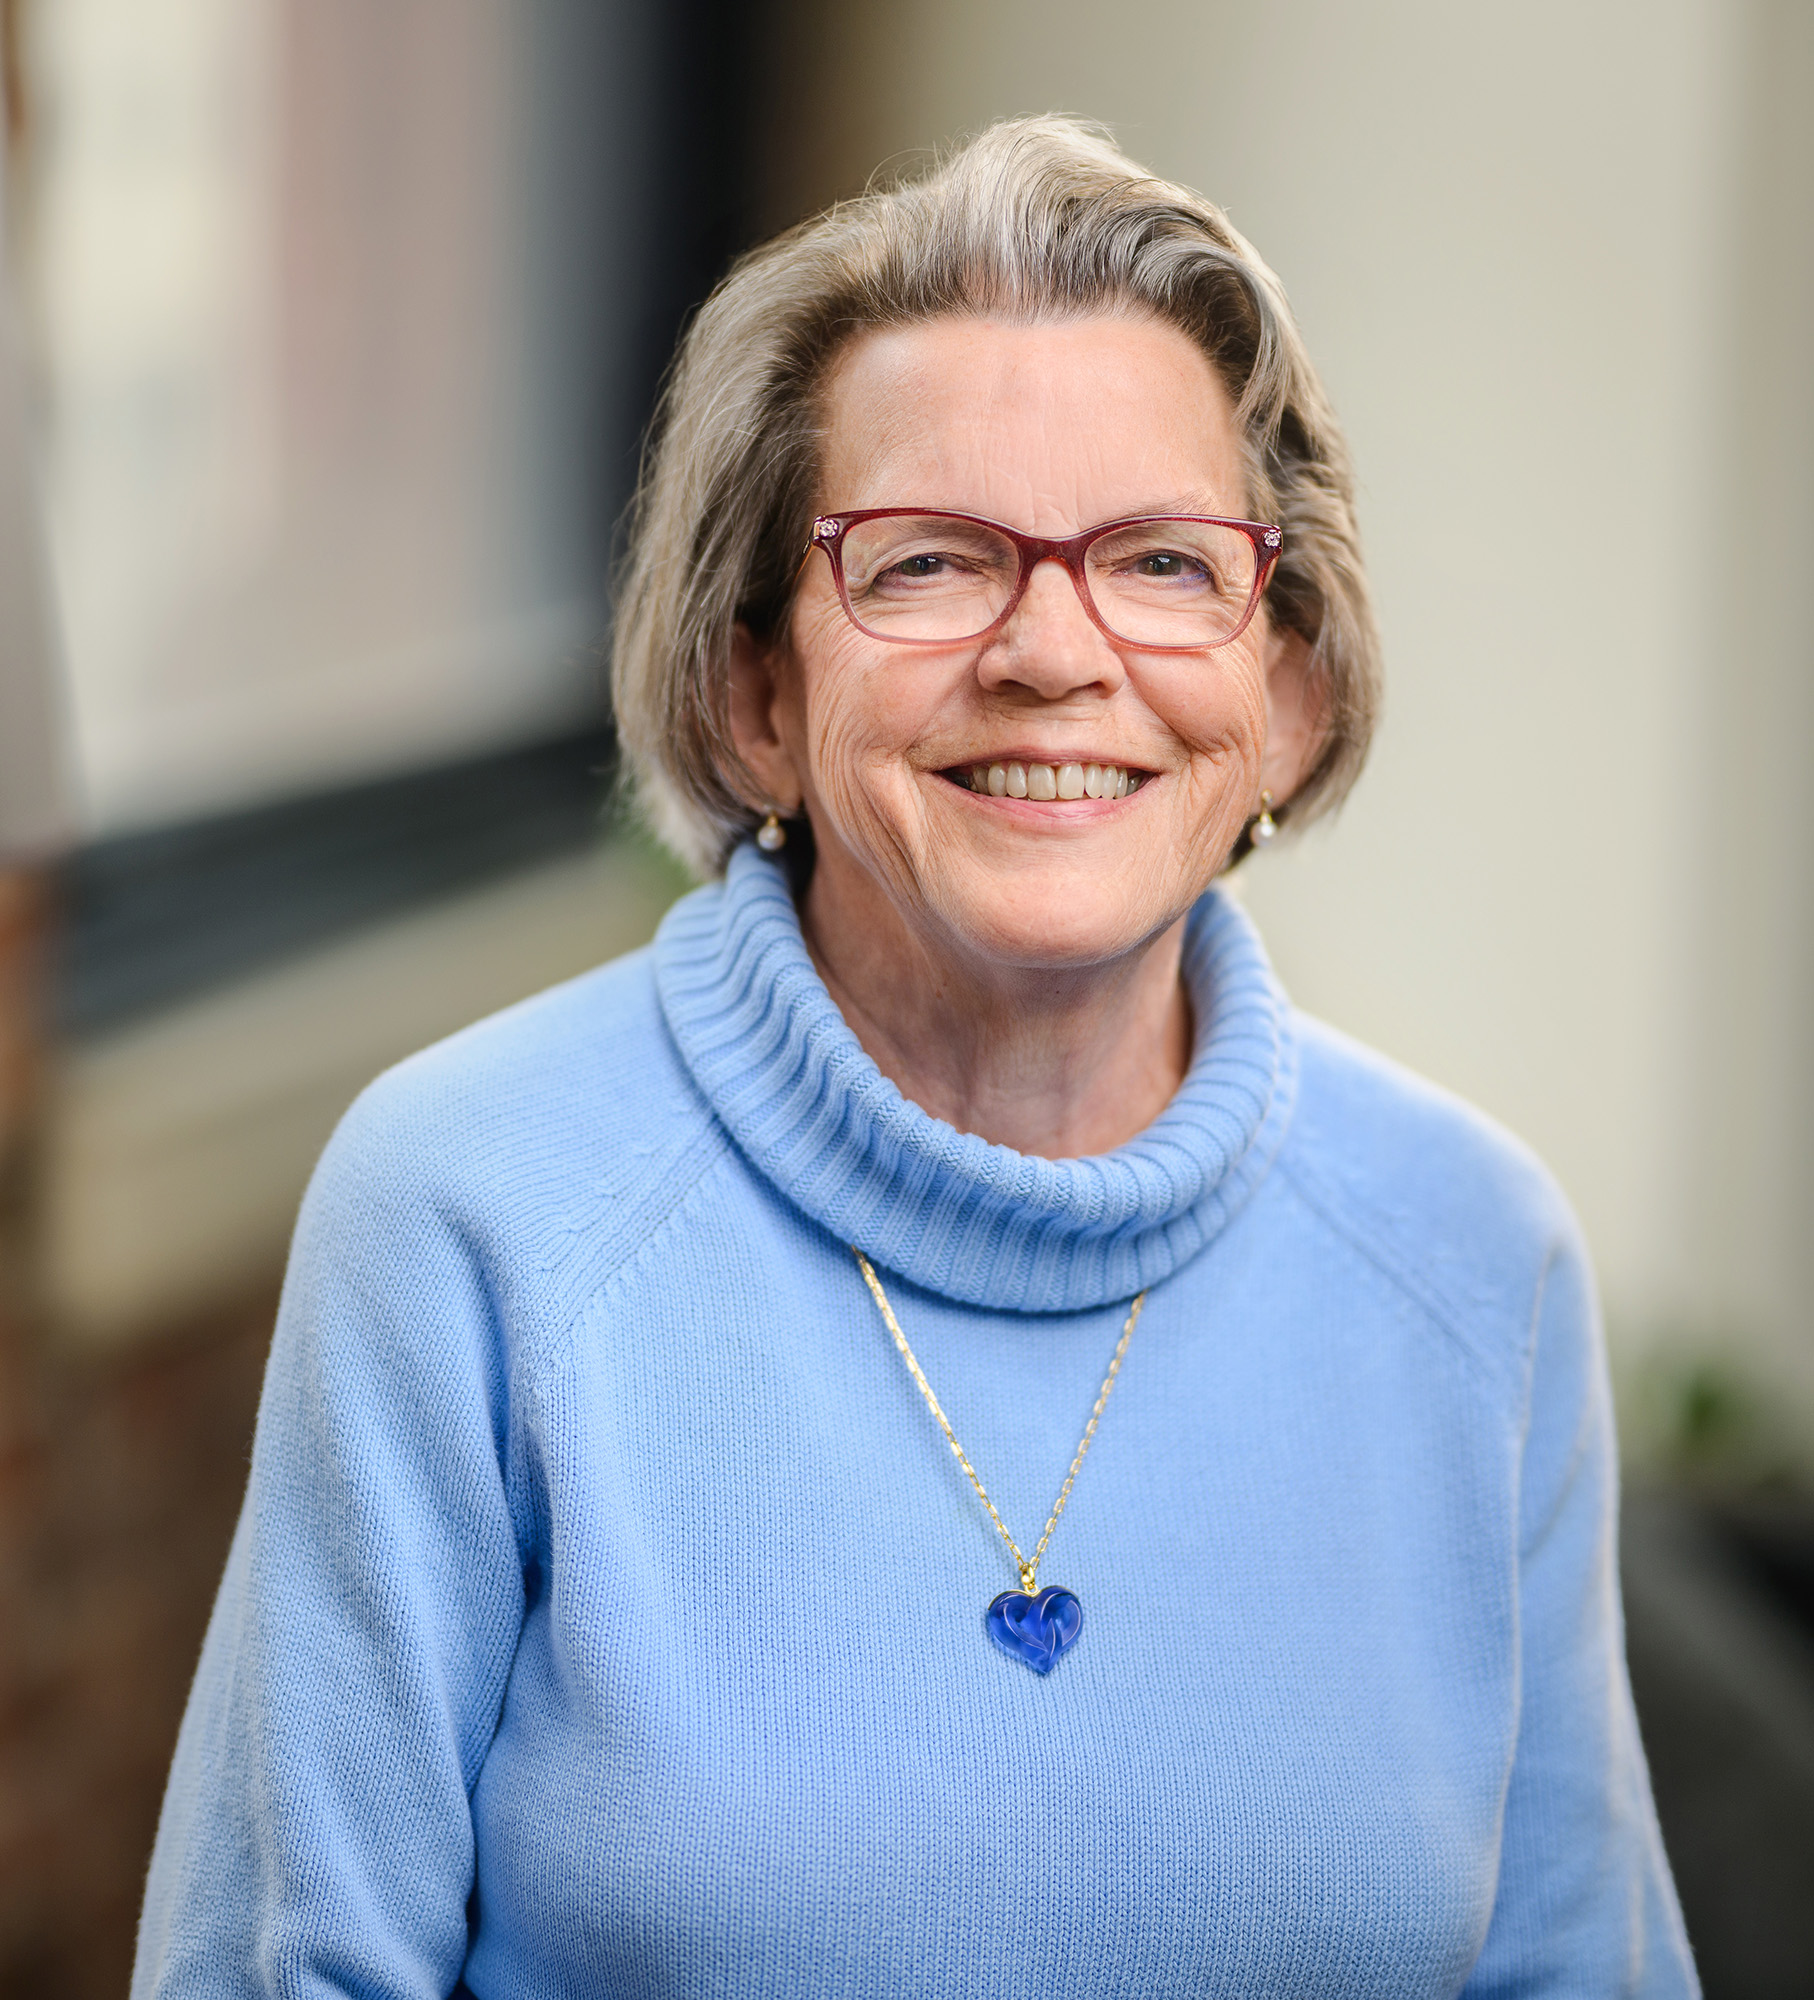 Photo of Barbara LeRoy. Barb is wearing a blue sweater and a necklace with a blue heart pendant. She has shoulder length gray hair, reddish brown glasses, and is smiling.